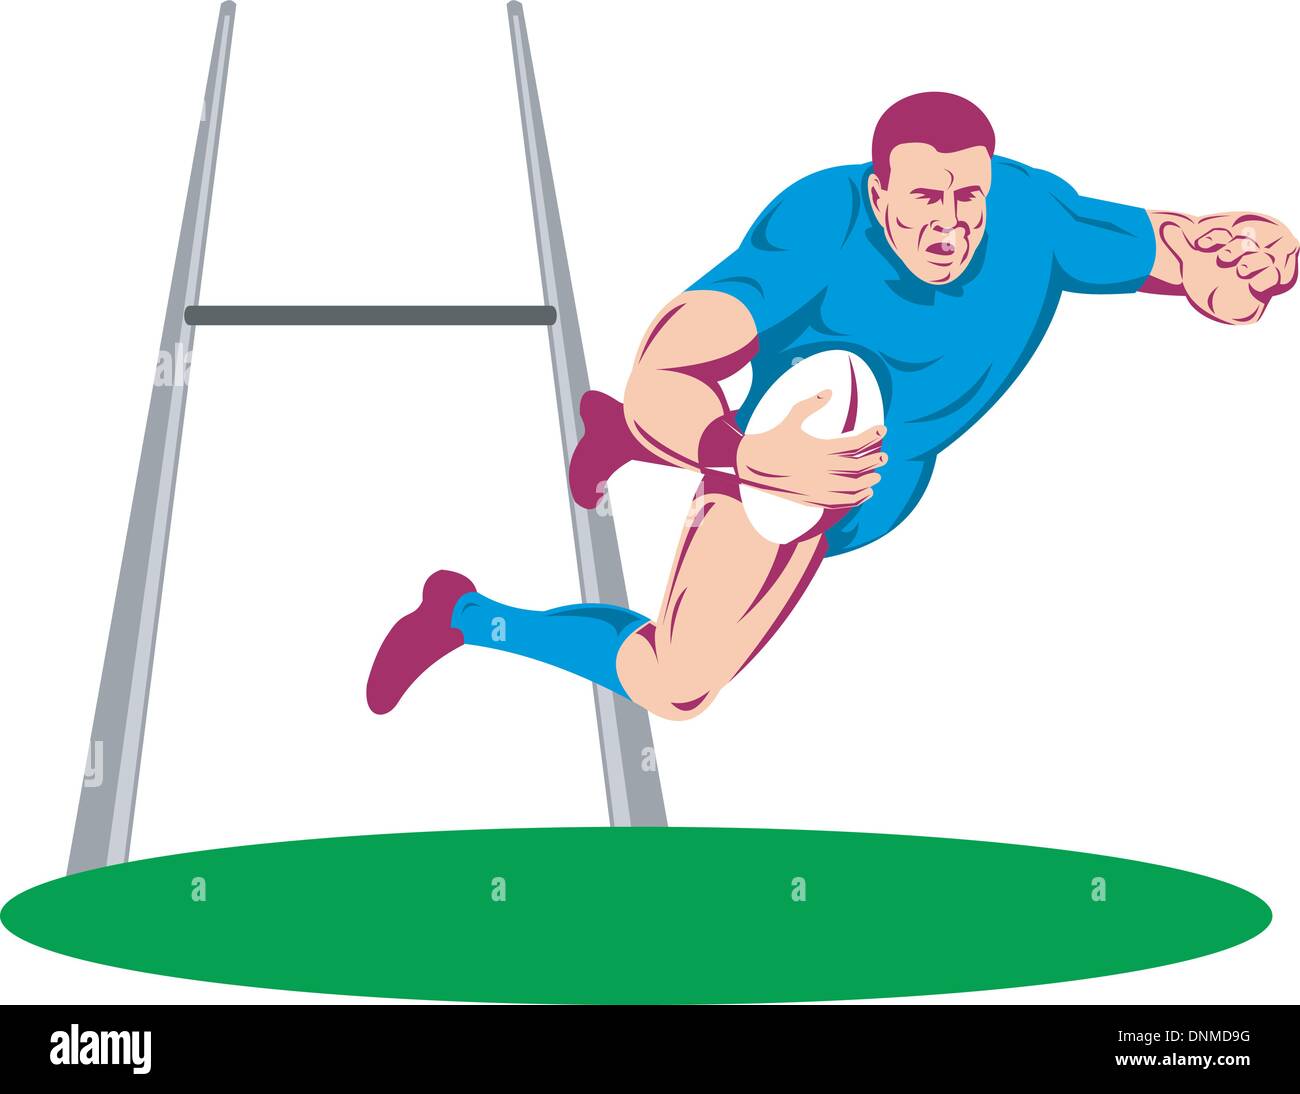 illustration of a rugby player diving to score a try on isolated background done in retro woodcut style Stock Vector